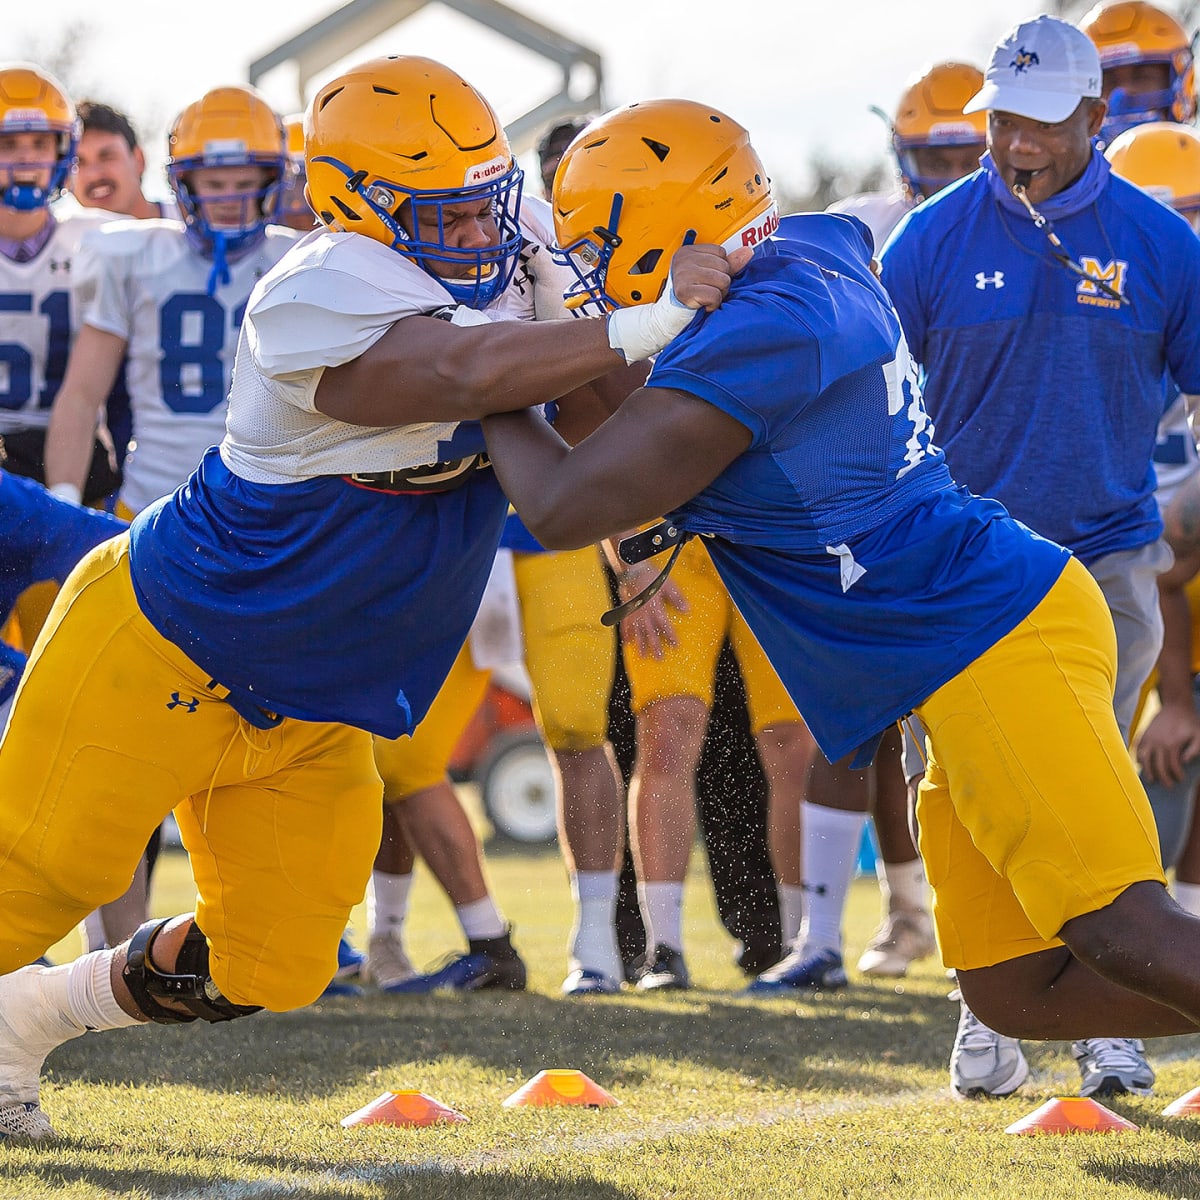 Mcneese Calendar Spring 2022 Mcneese State's Fcs Spring Season Has New Meaning Post-Hurricane - Sports  Illustrated